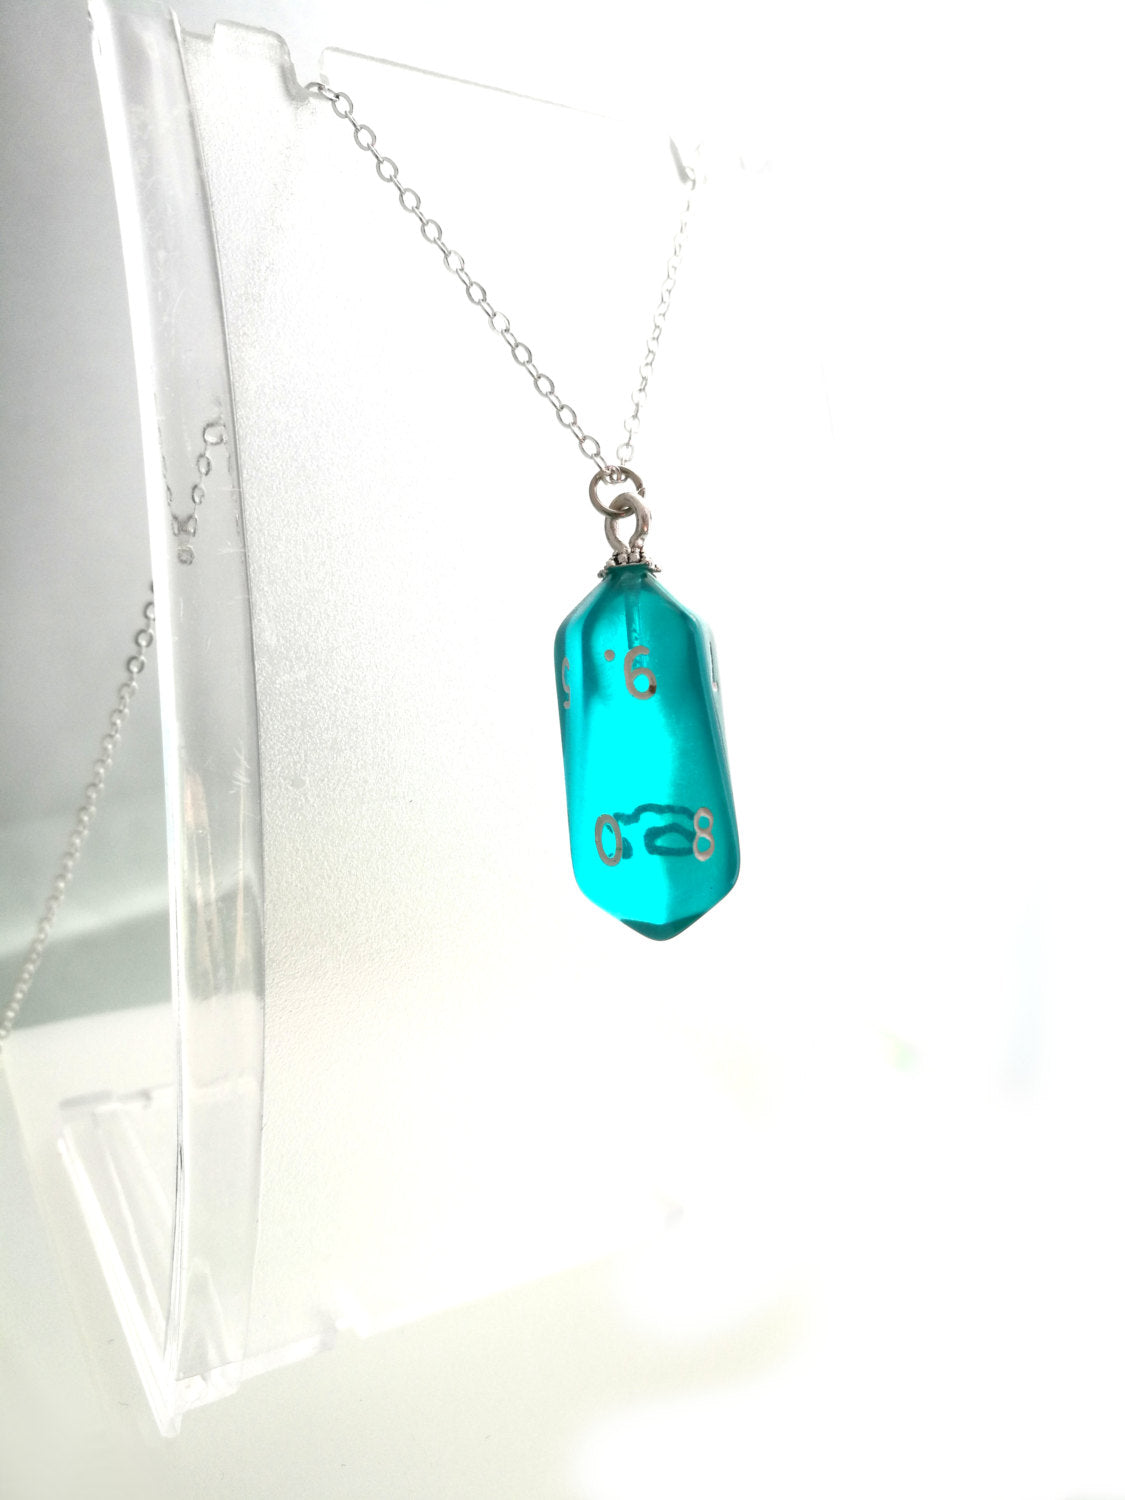 Pair of Dice Teal Crystal Fiona Necklace 